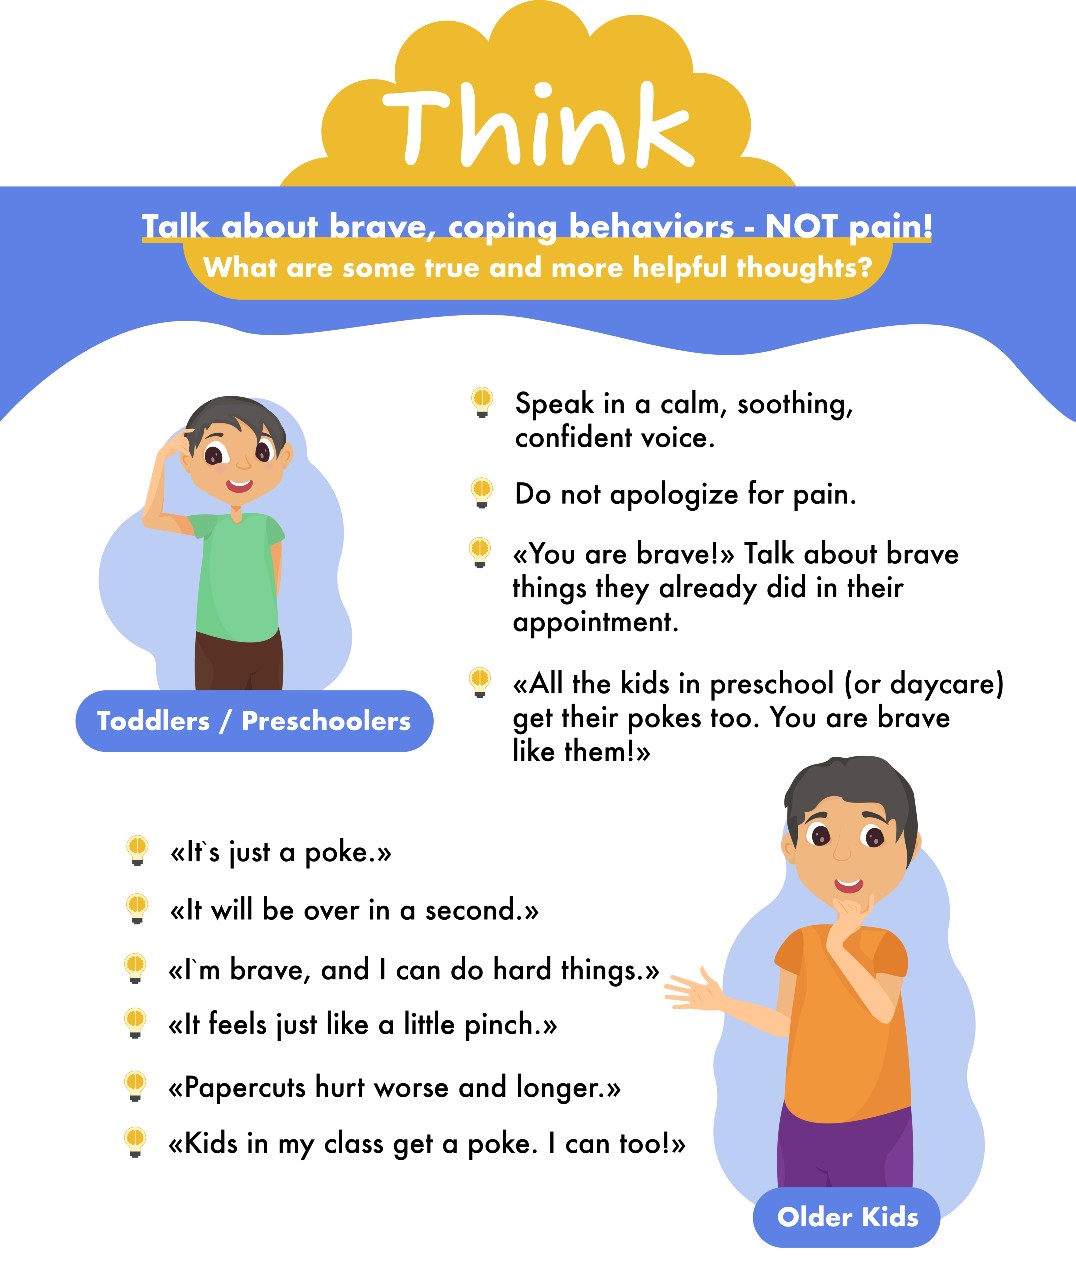 think-tips-for-kids-getting-vaccines